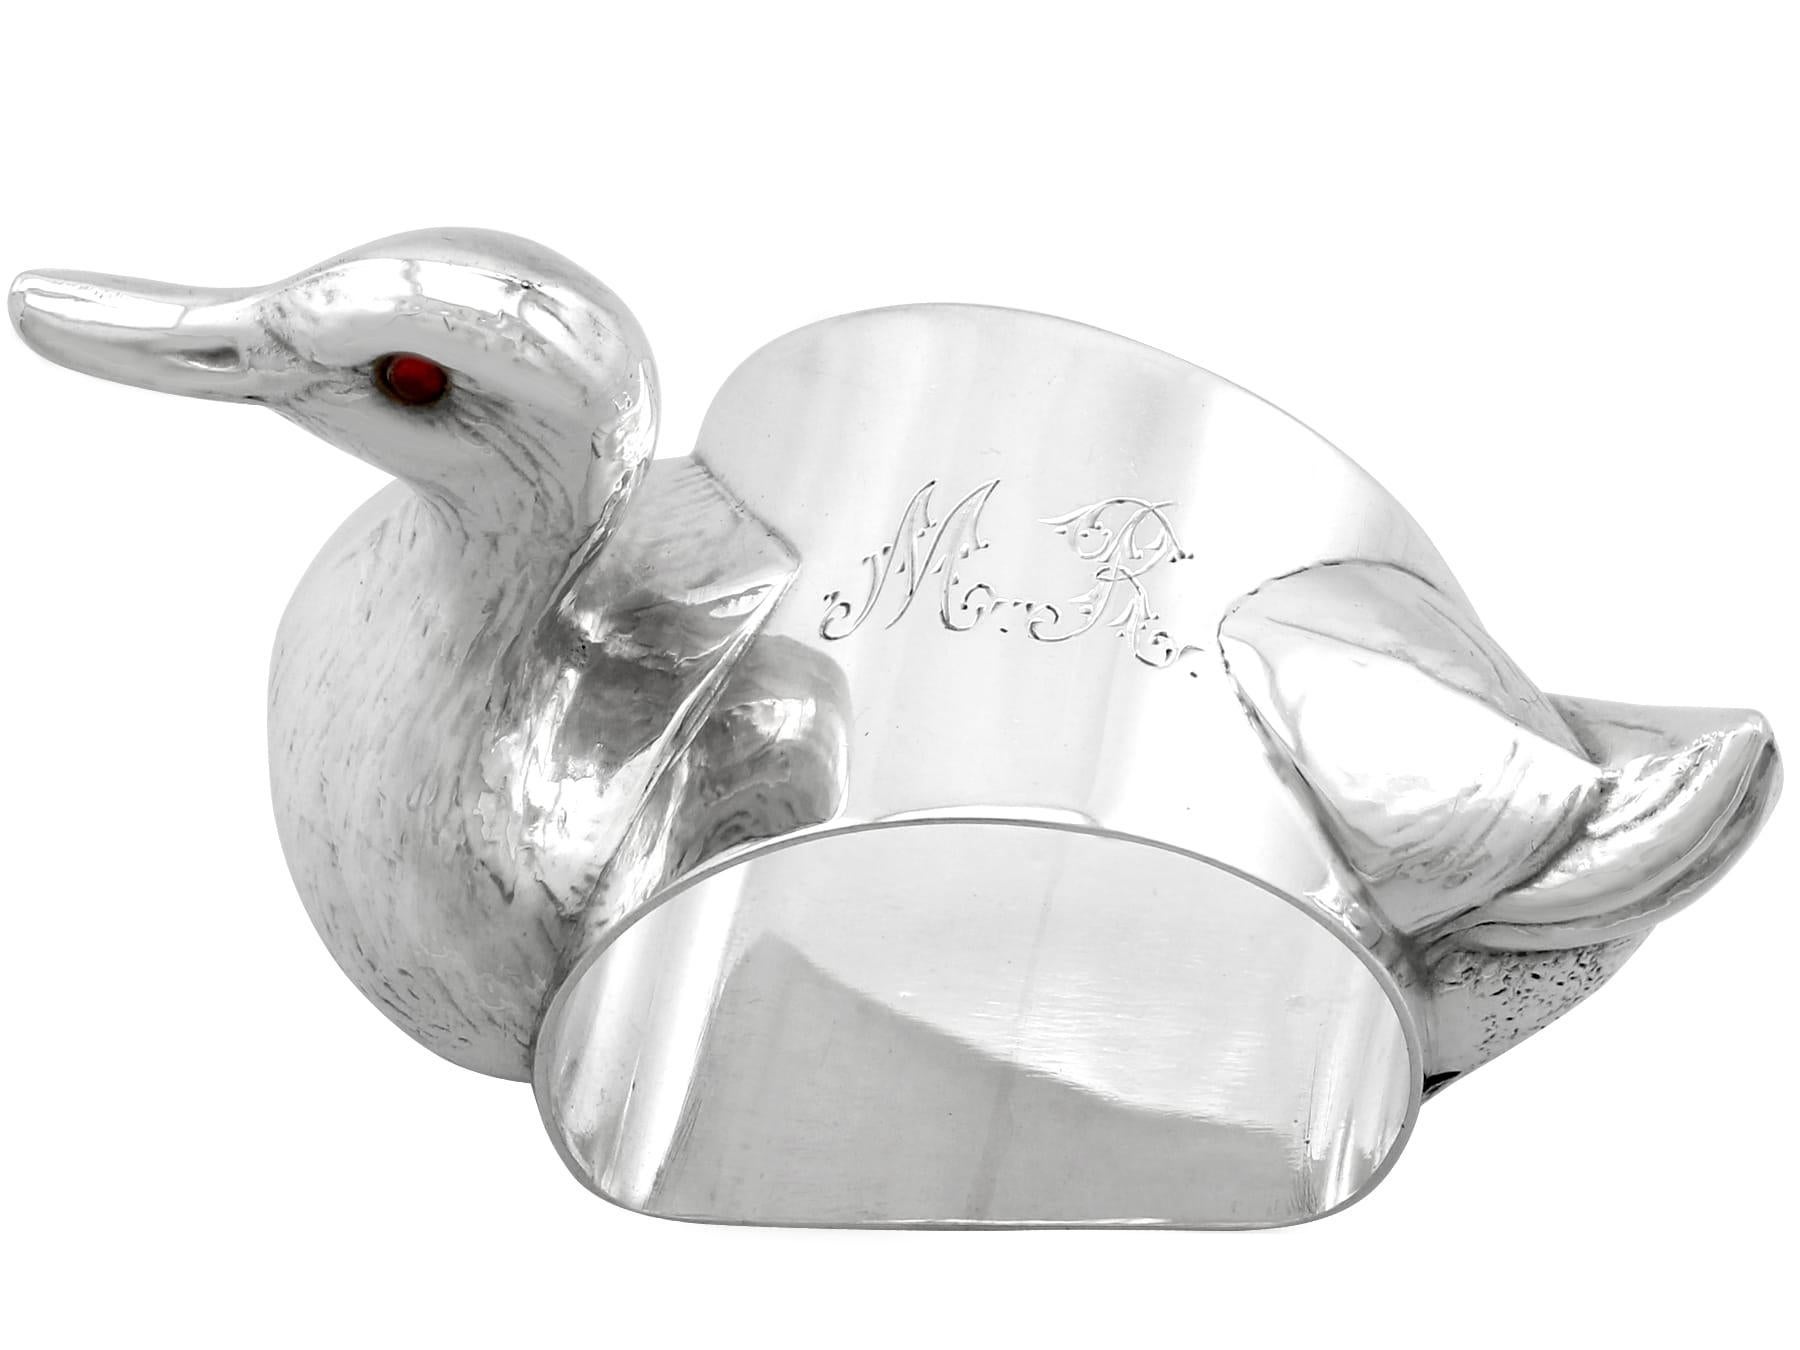 An exceptional, fine and impressive antique George V English sterling silver duck napkin ring; an addition to our christening silverware collection.

This exceptional antique George V sterling silver napkin ring has been realistically modeled in